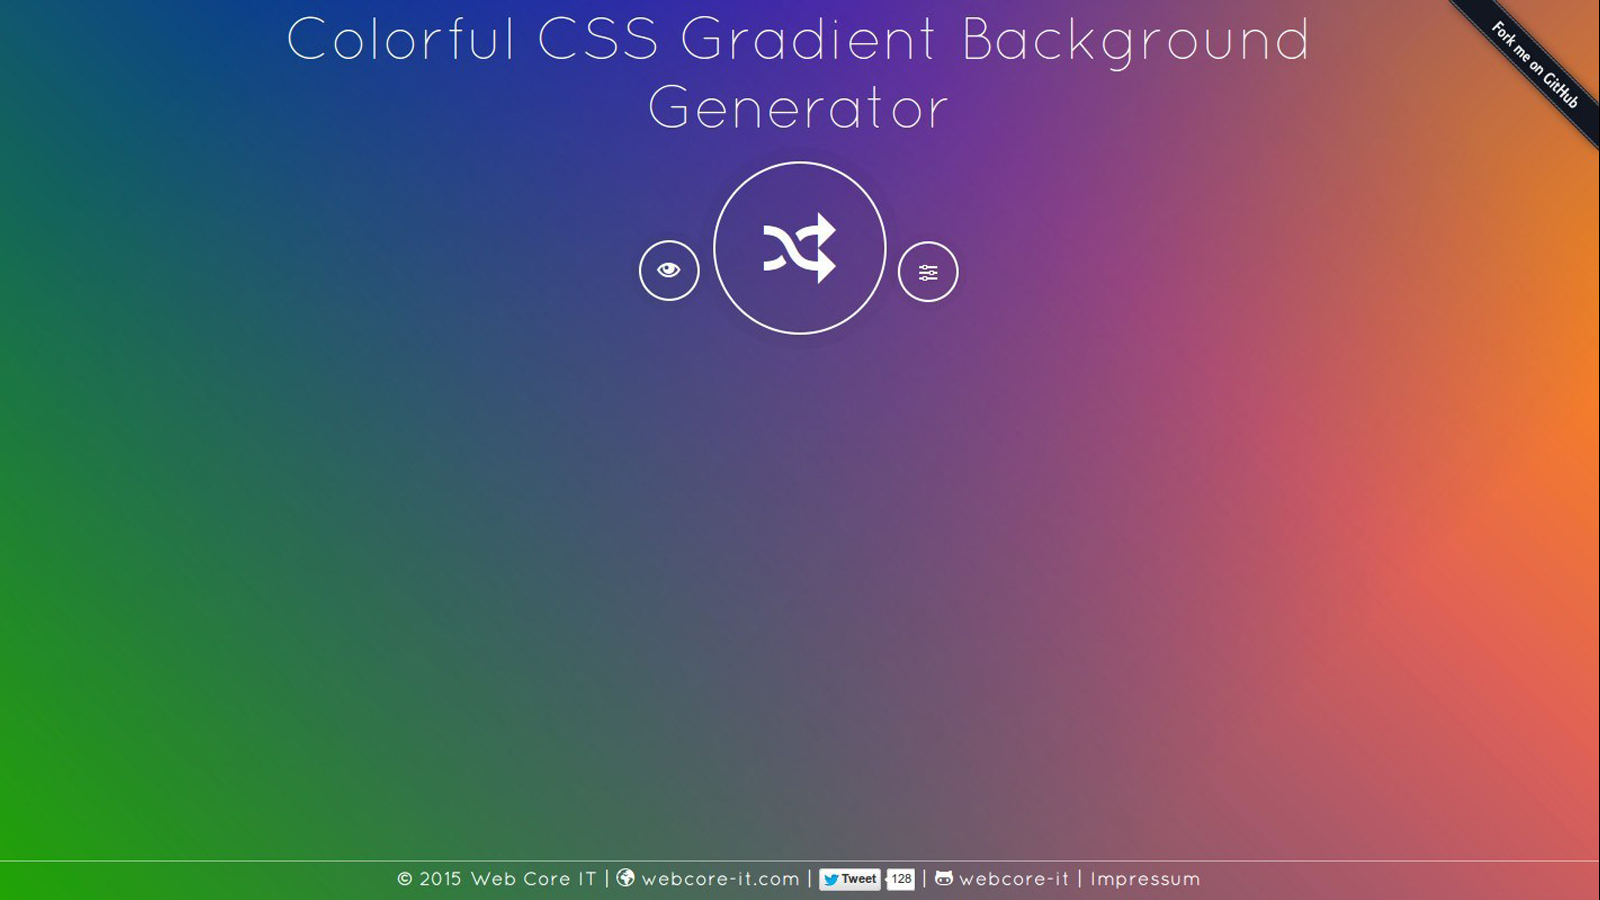 CCBG - Colorful CSS Background Generator